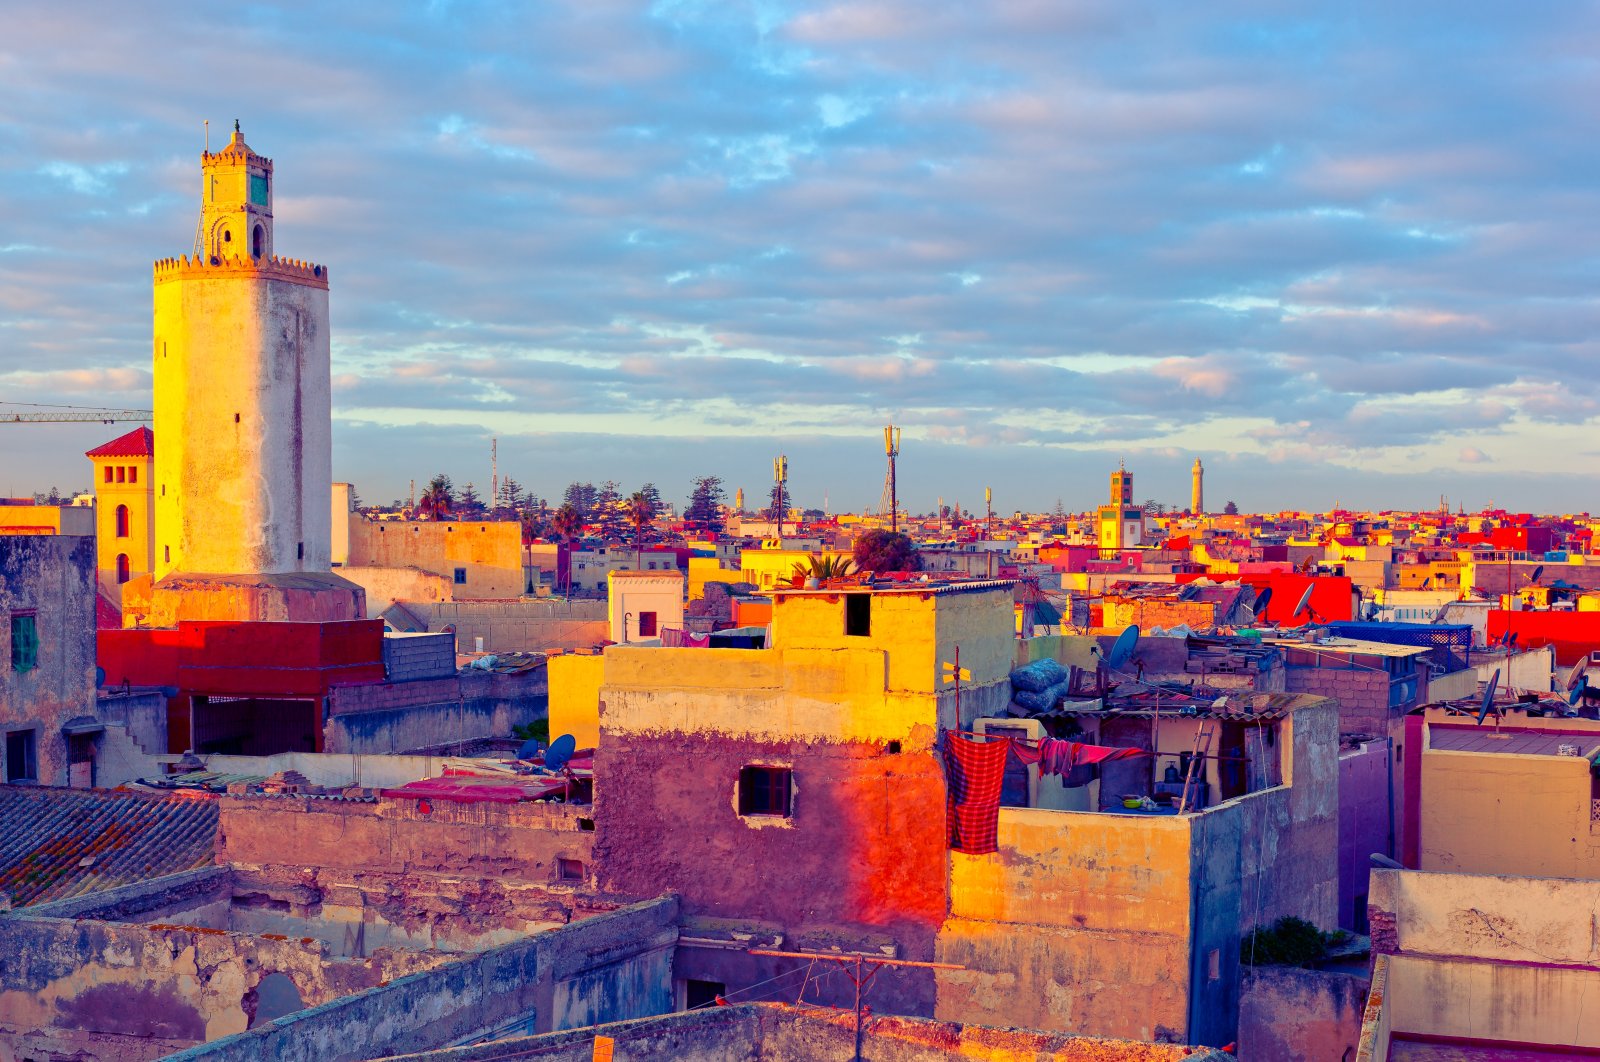 The Grand Mosque in Fortress of Mazagan and the El Jadida cityscape at sunrise, Morocco. (Shutterstock Photo)